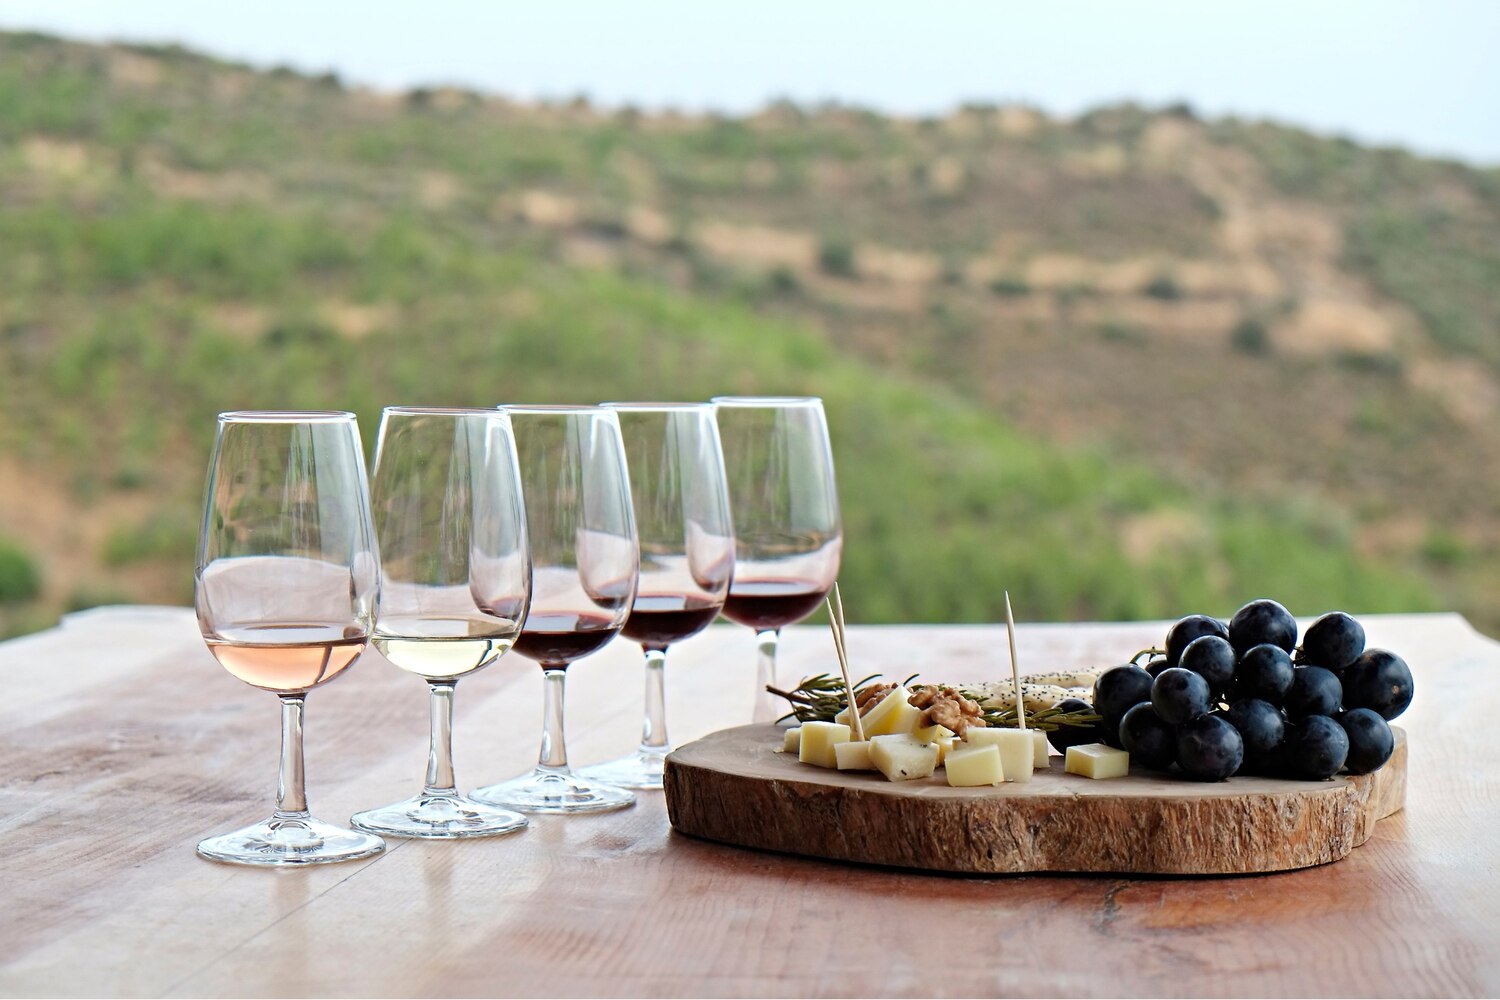 A spread of wine glasses and a cheese platter set outdoors with a vineyard and rolling hills in the background.